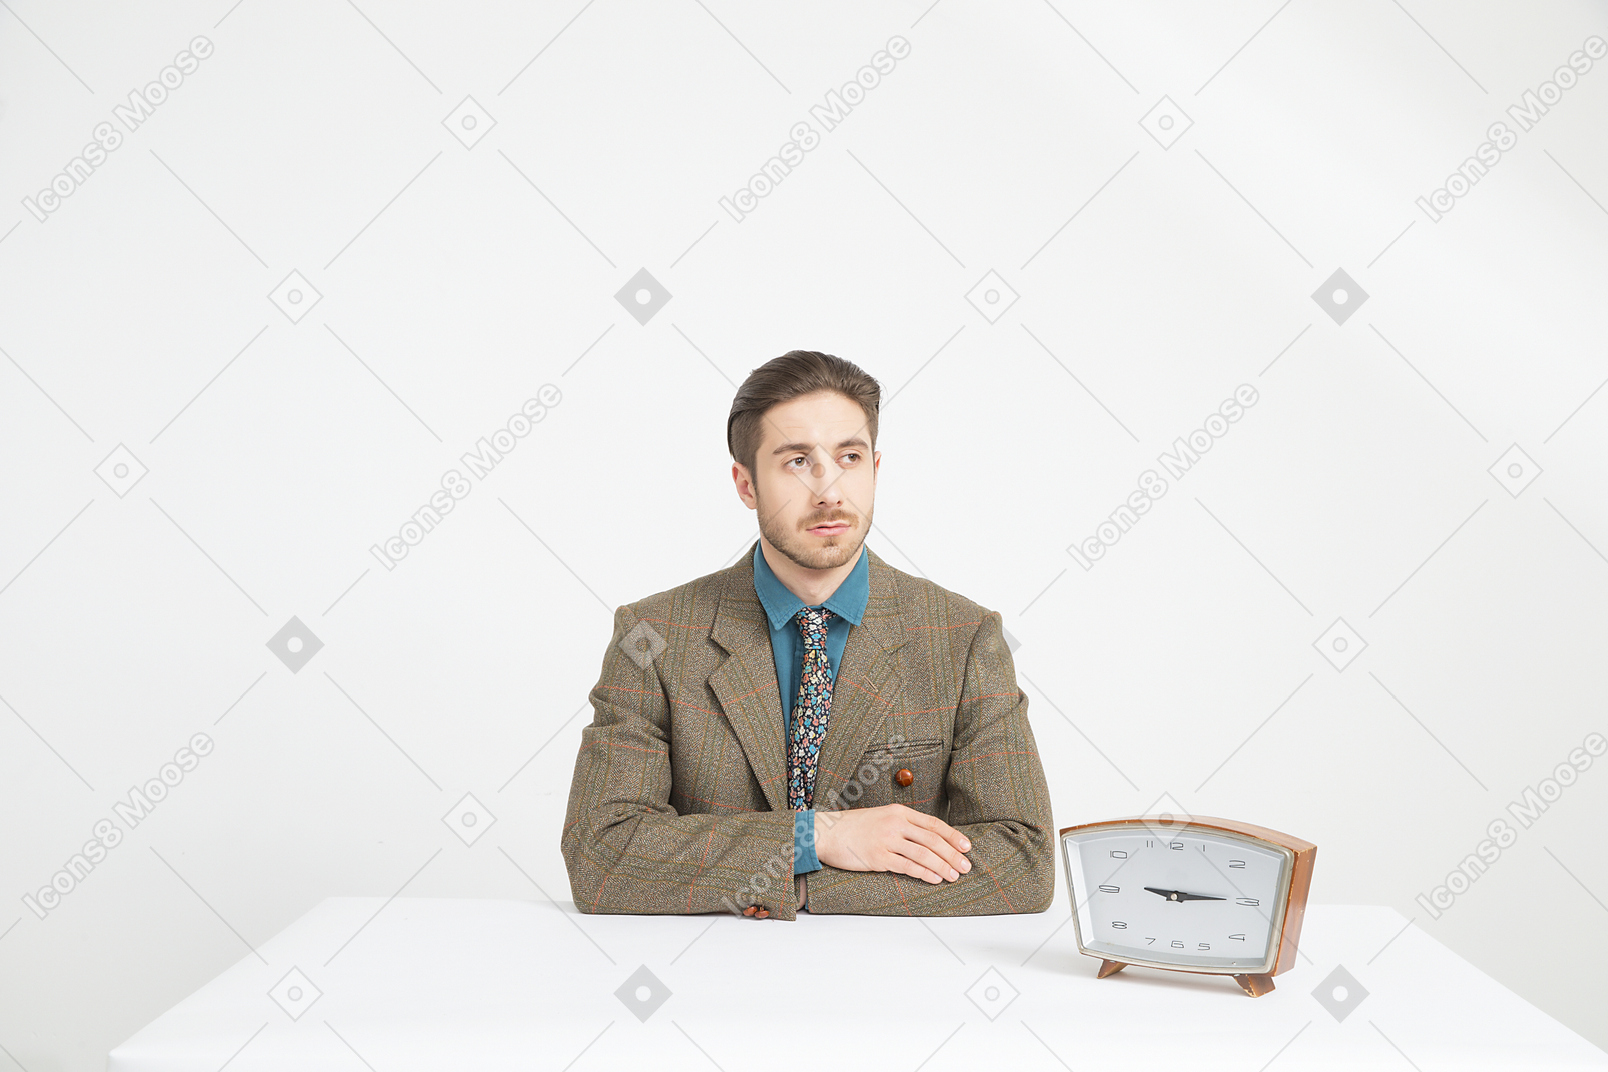 Handsome young man sitting near the clock with his hands folded